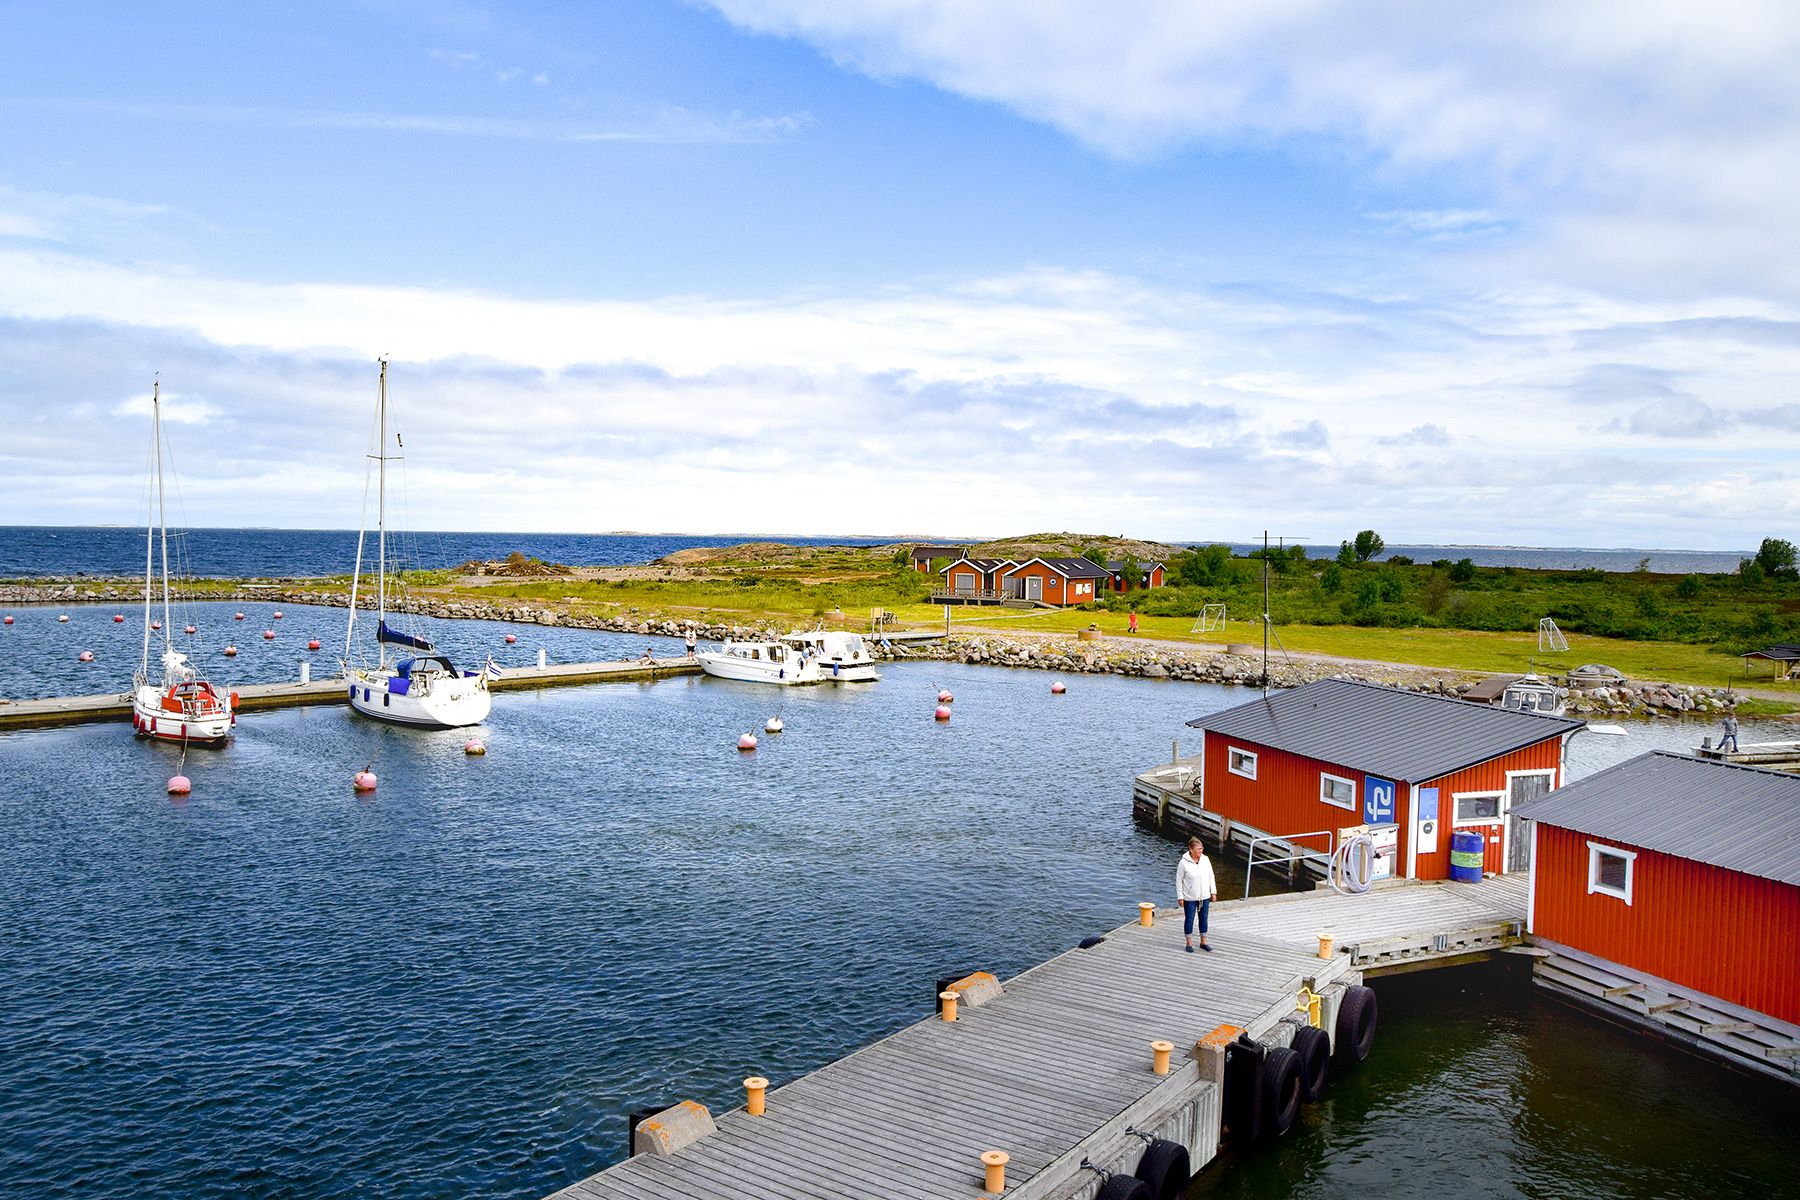 The harbour on the island of Jurmo, featuring red wooden buildings and sailboats.